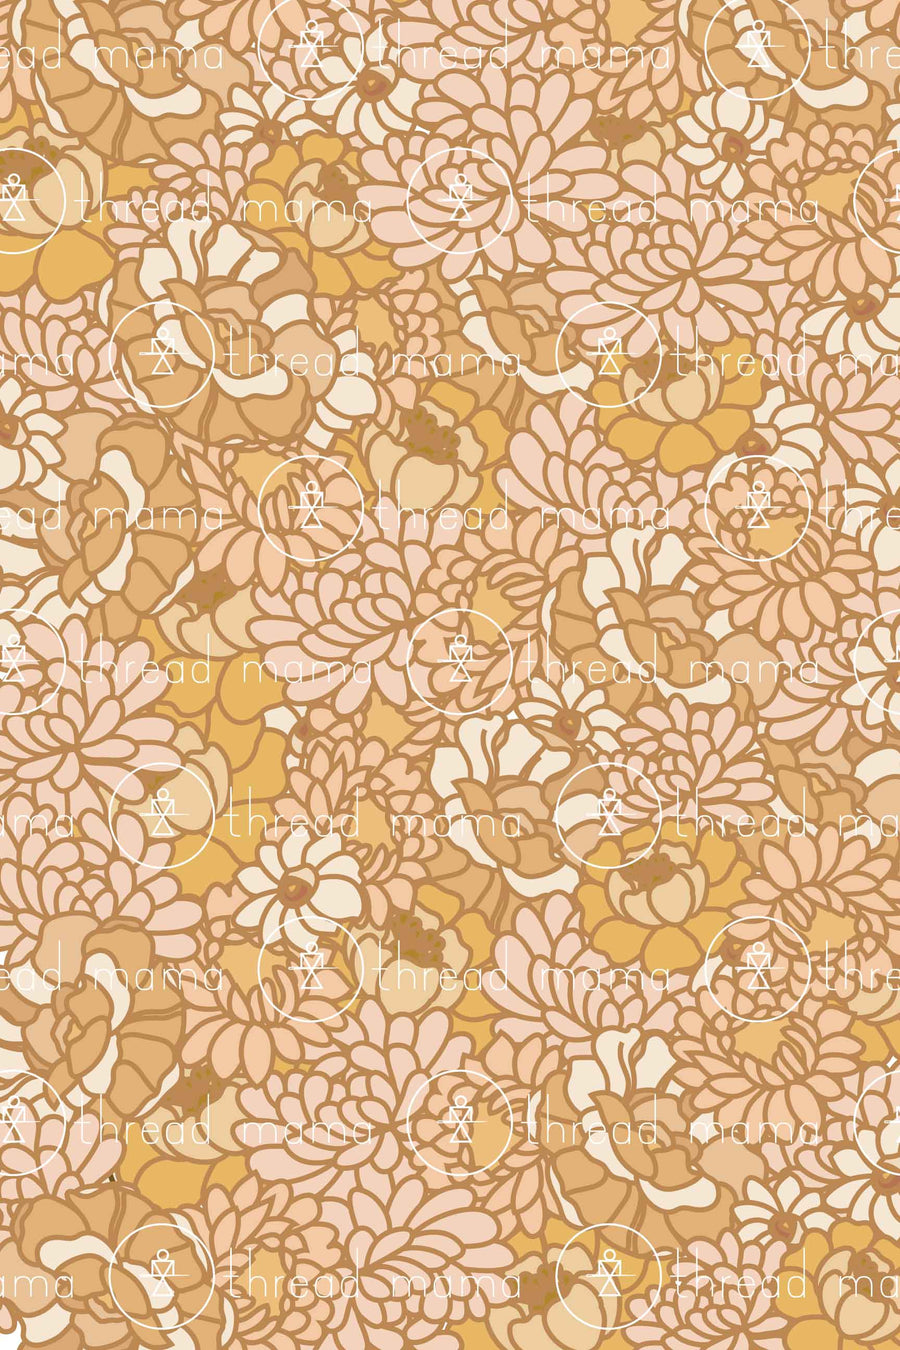 Background Pattern #10 (Printable Poster)